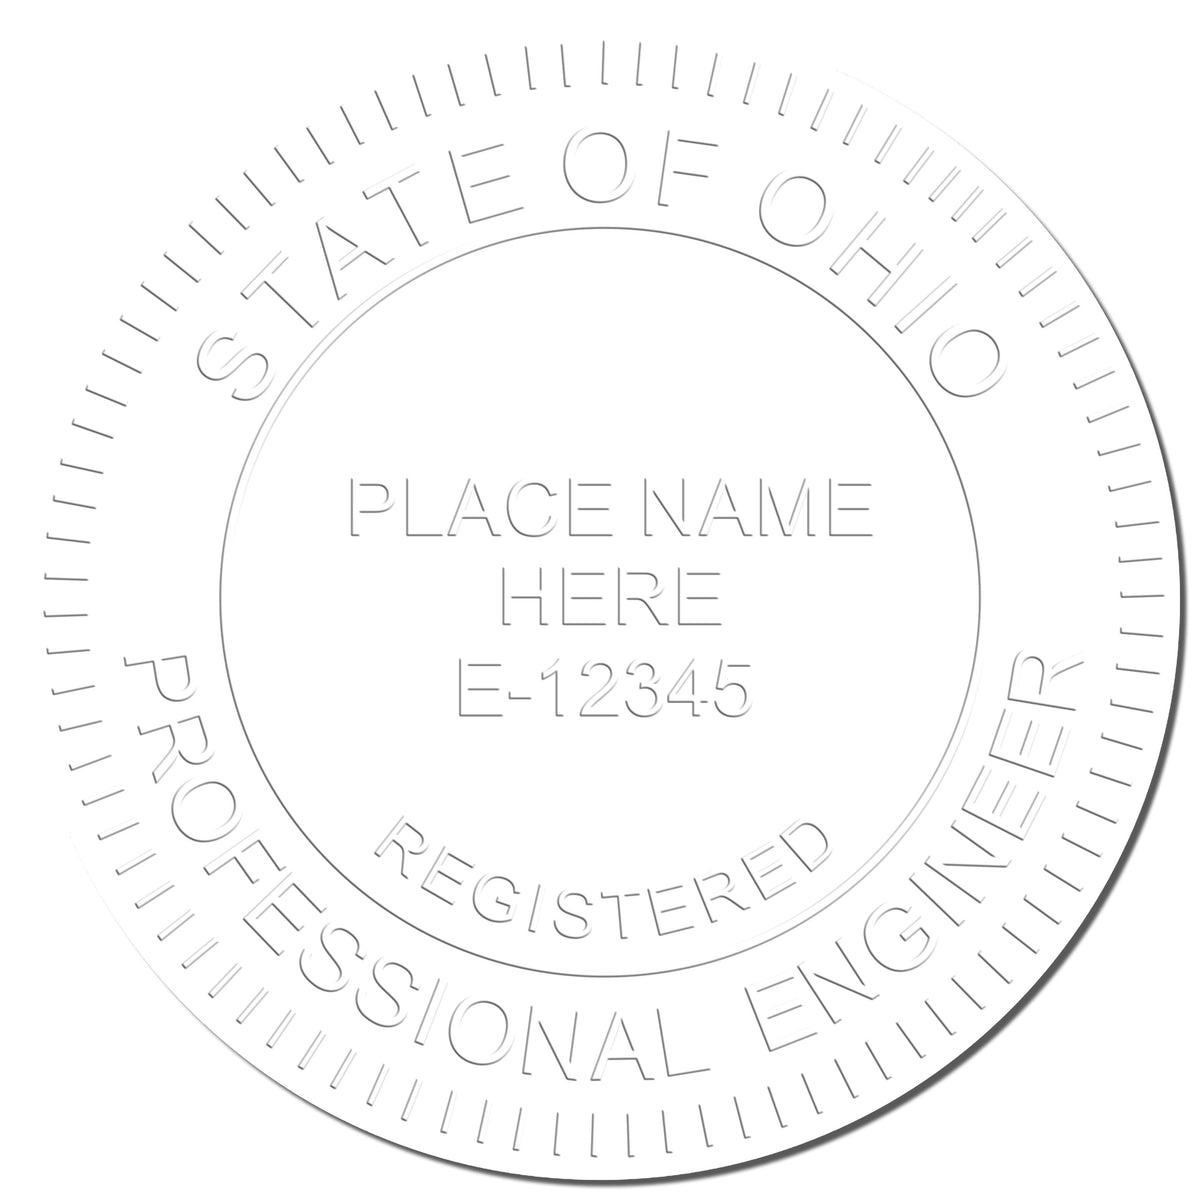 The Long Reach Ohio PE Seal stamp impression comes to life with a crisp, detailed photo on paper - showcasing true professional quality.